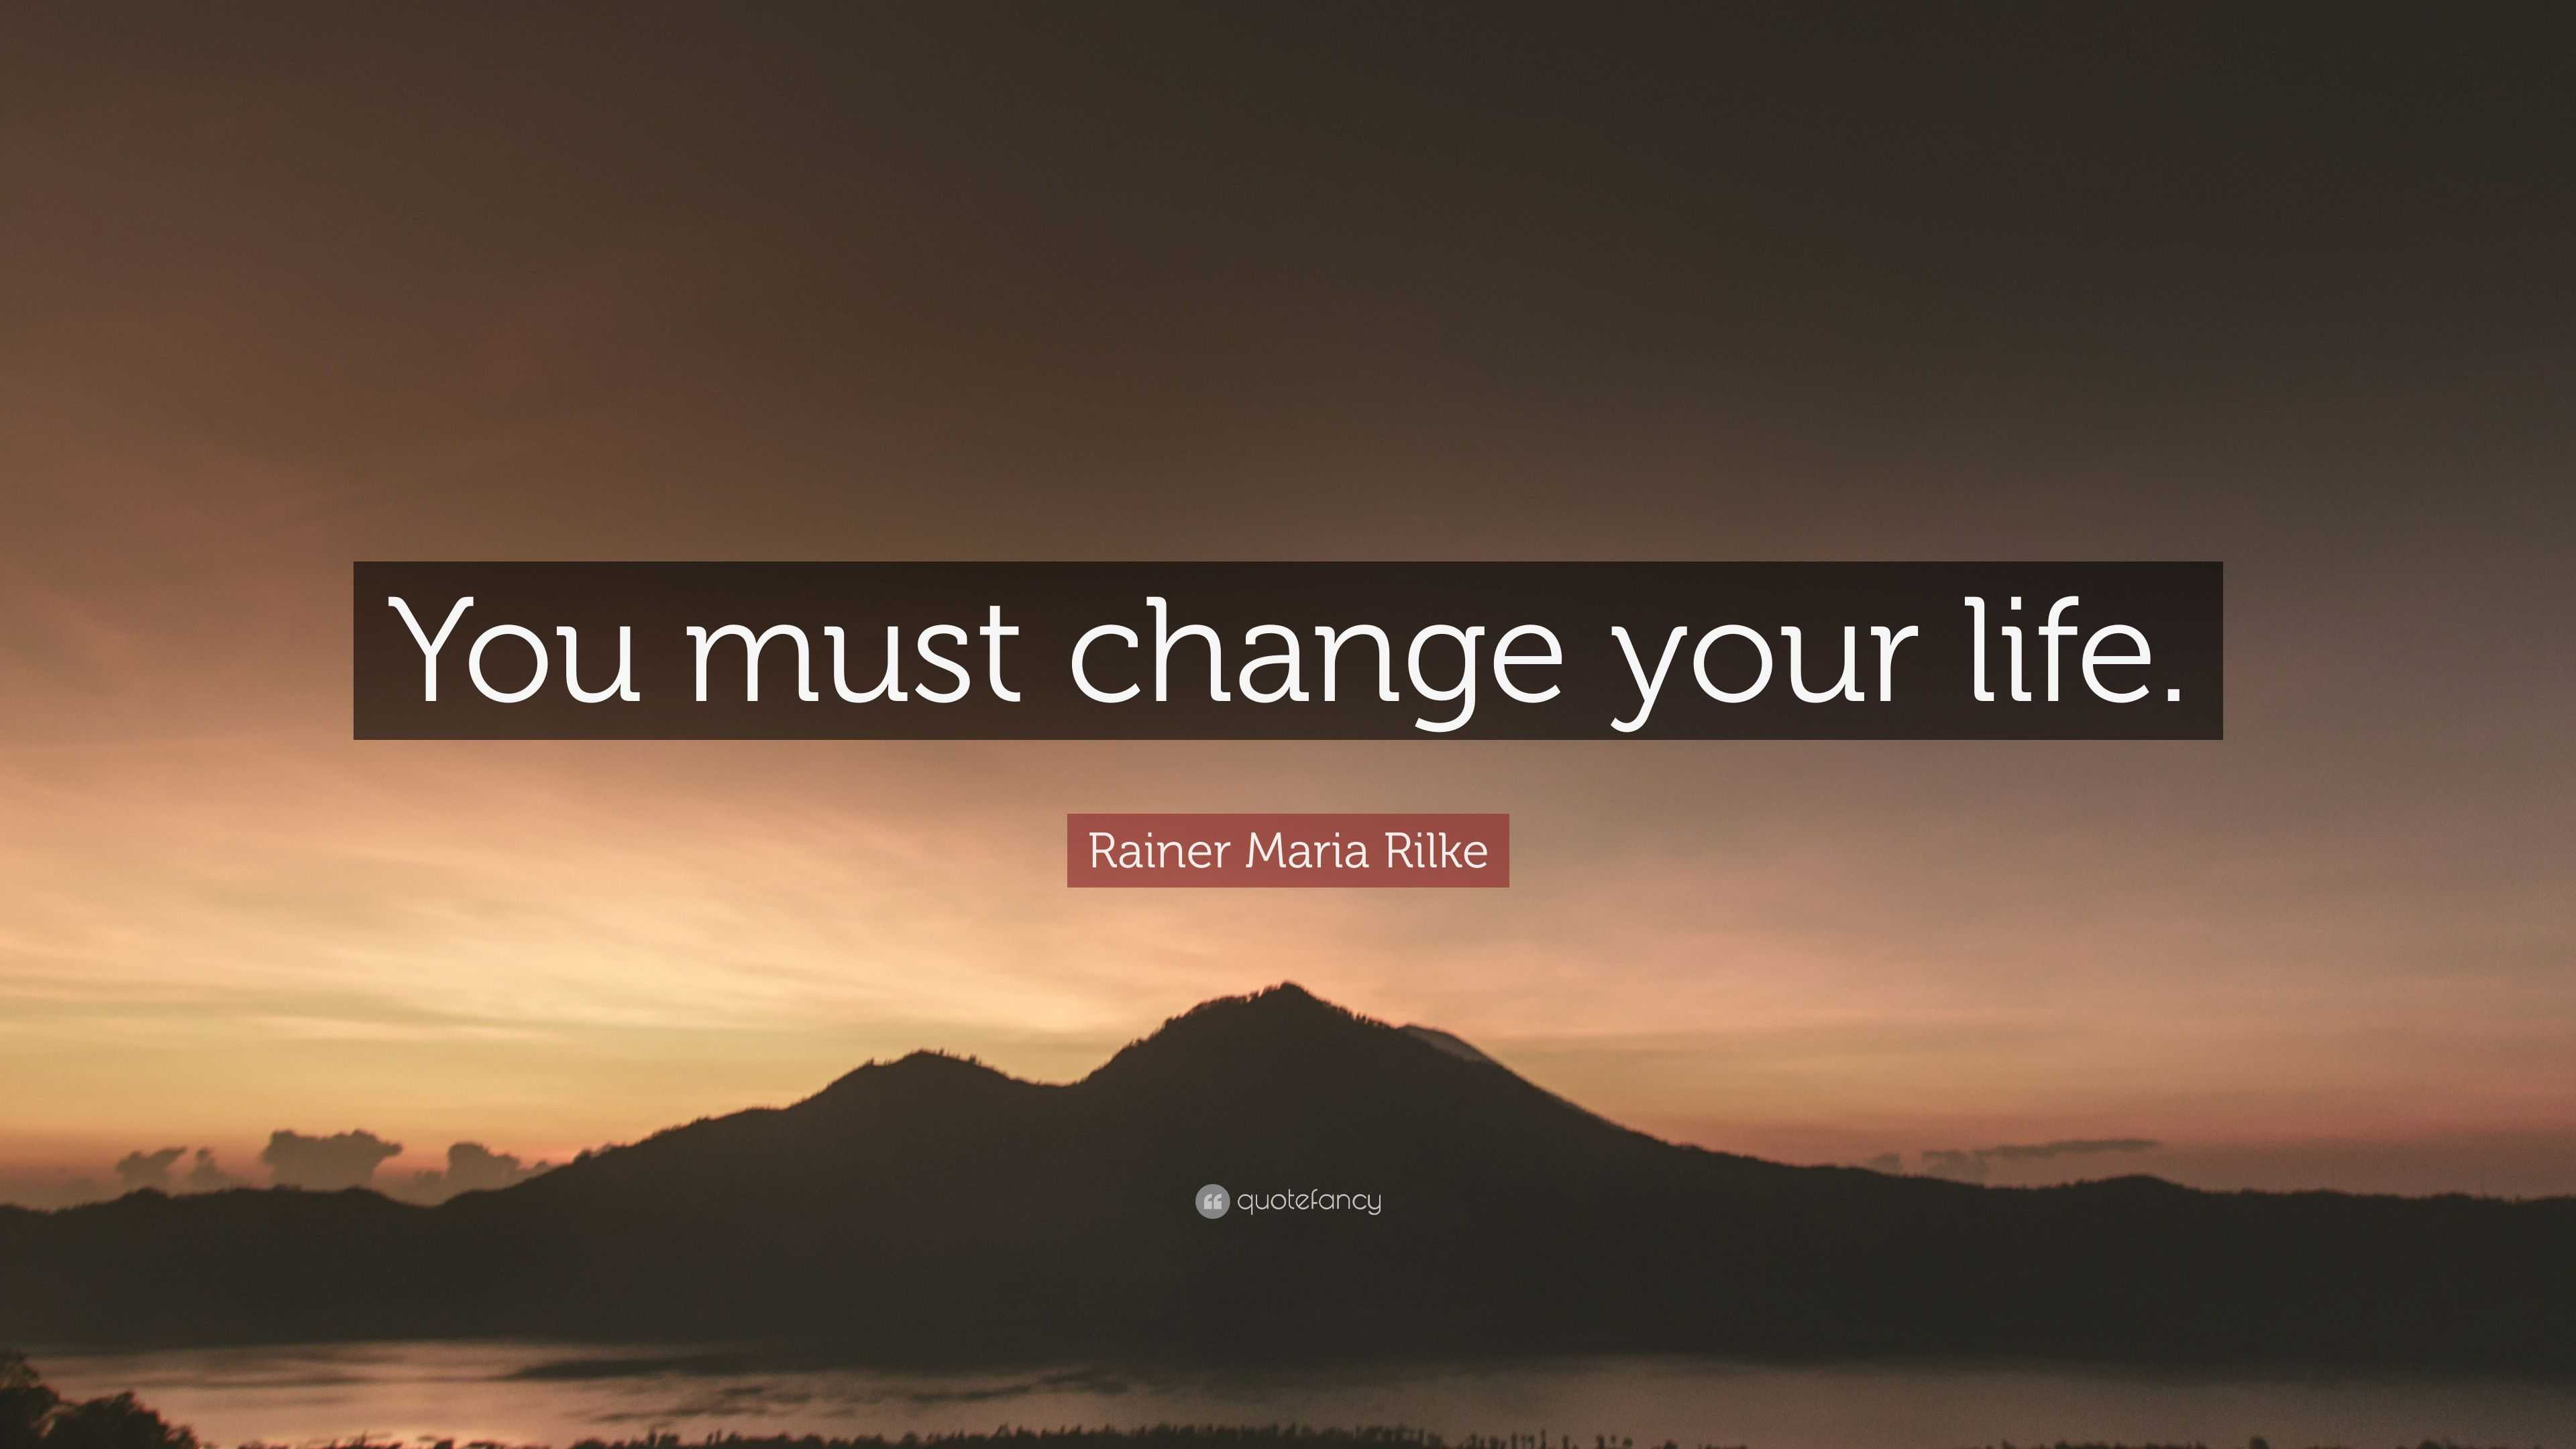 Rainer Maria Rilke Quote: “You must change your life.”